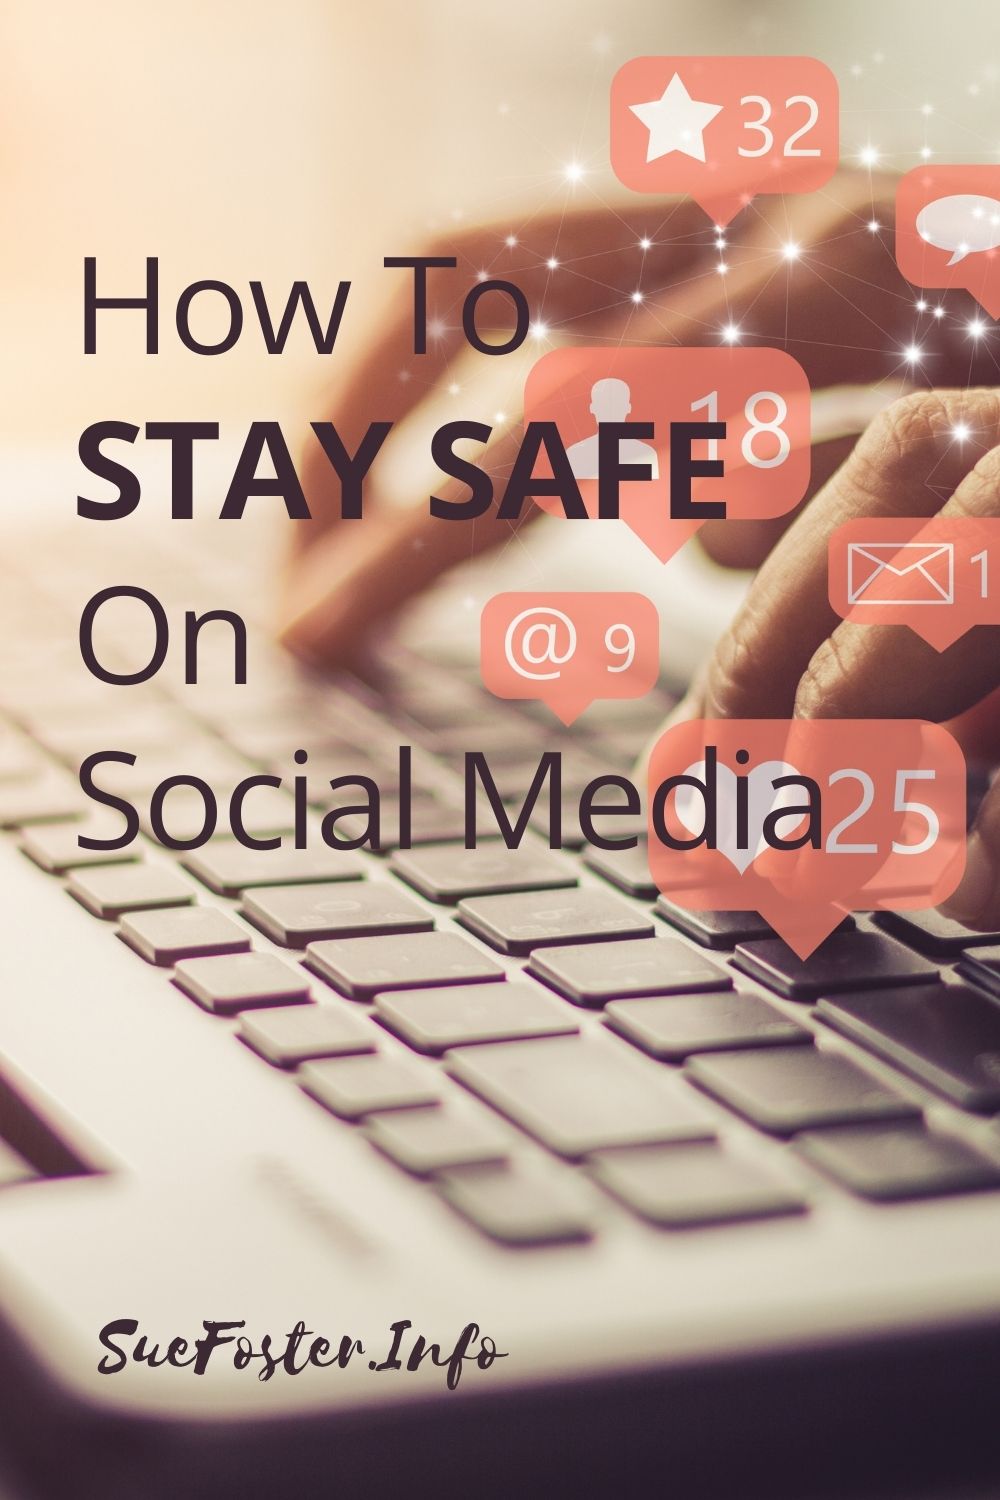 Whether you have children trying to find their way through social media or want to heighten your own security follow these simple, but effective steps.